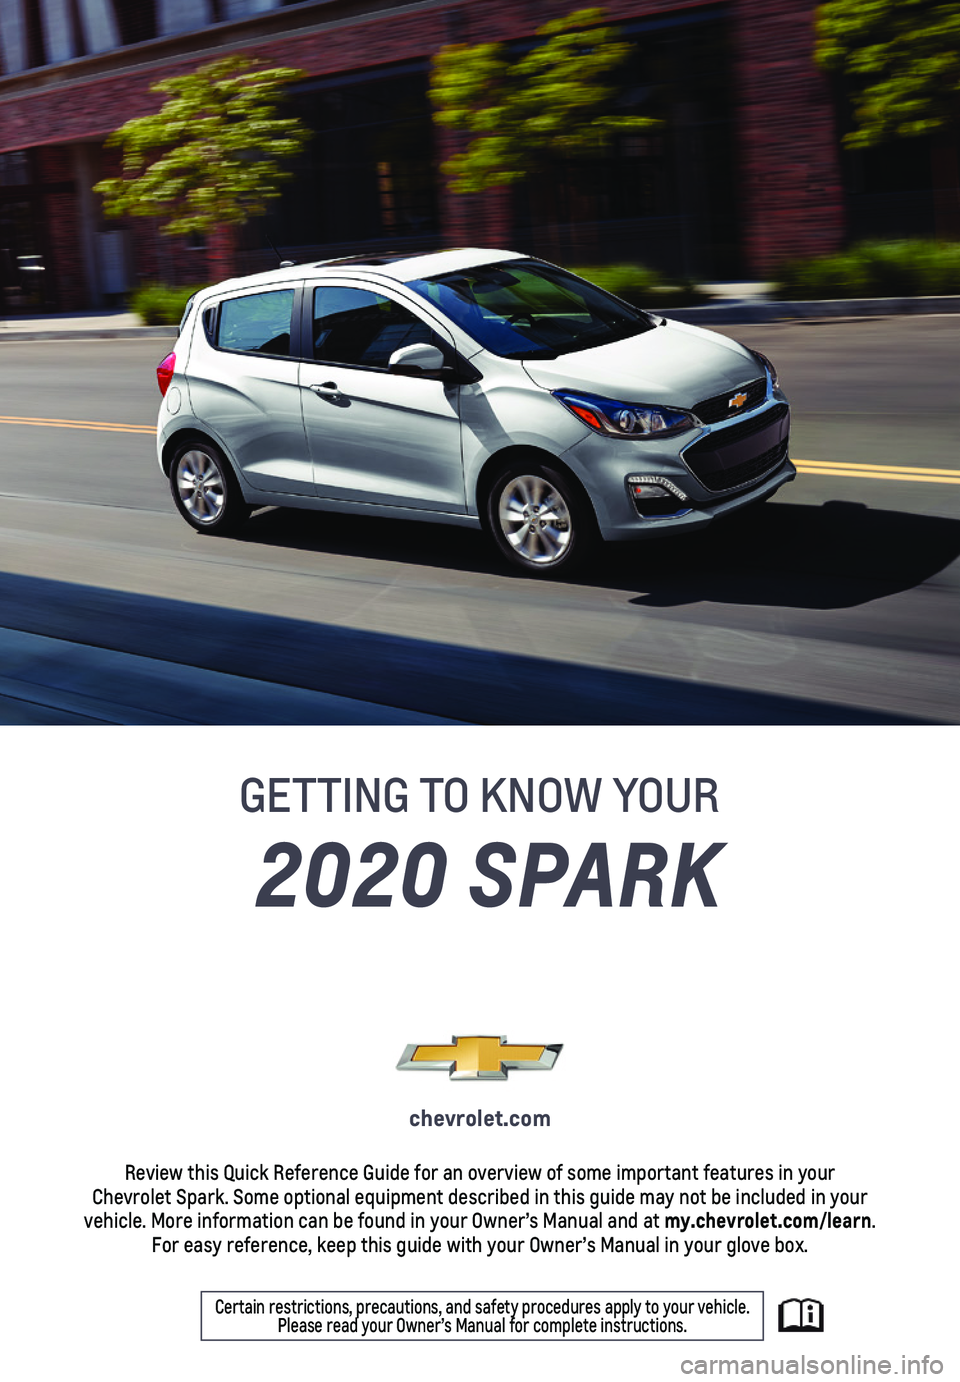 CHEVROLET SPARK 2020  Get To Know Guide 1
2020 SPARK
GETTING TO KNOW YOUR
chevrolet.com
Review this Quick Reference Guide for an overview of some important feat\
ures in your  Chevrolet Spark. Some optional equipment described in this guide